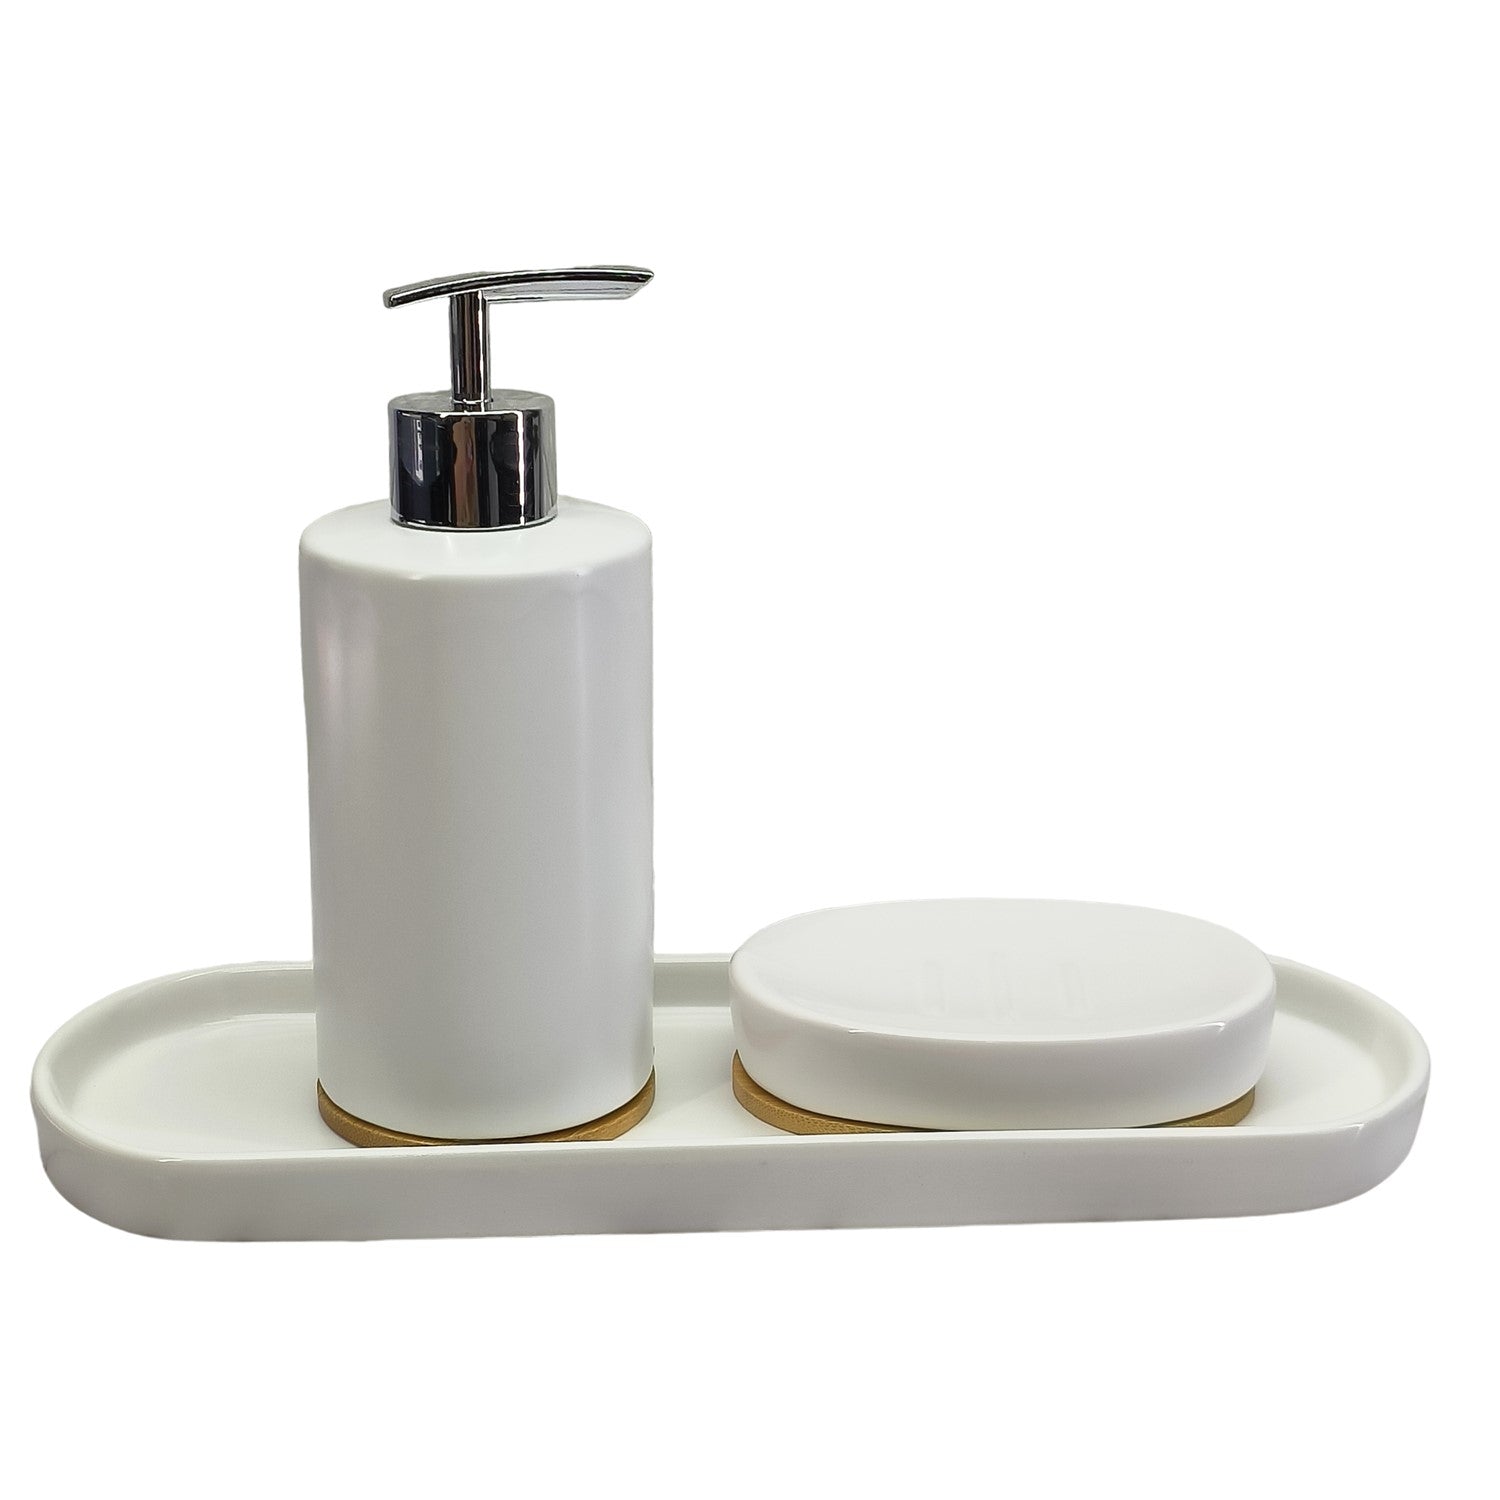 Ceramic Soap Dispenser Set with Soap Dish, Set of 2 Bathroom Accessories for Home (C2040)